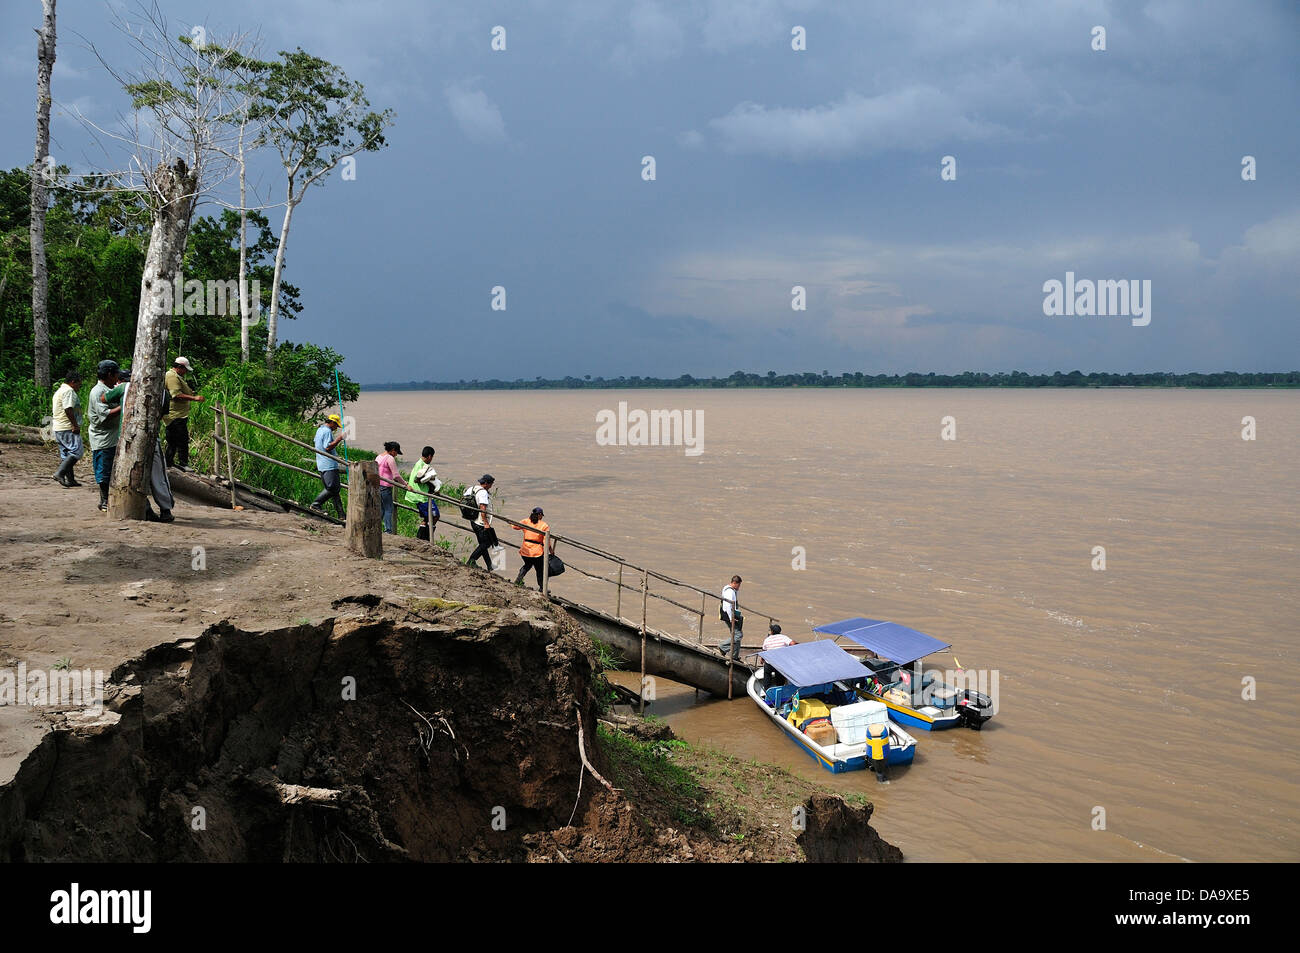 South America, Peru, Indigenous, Indian tribe, Indian Village, Ticuna Indians, Amazon, River, boat, storm, rain, Stock Photo